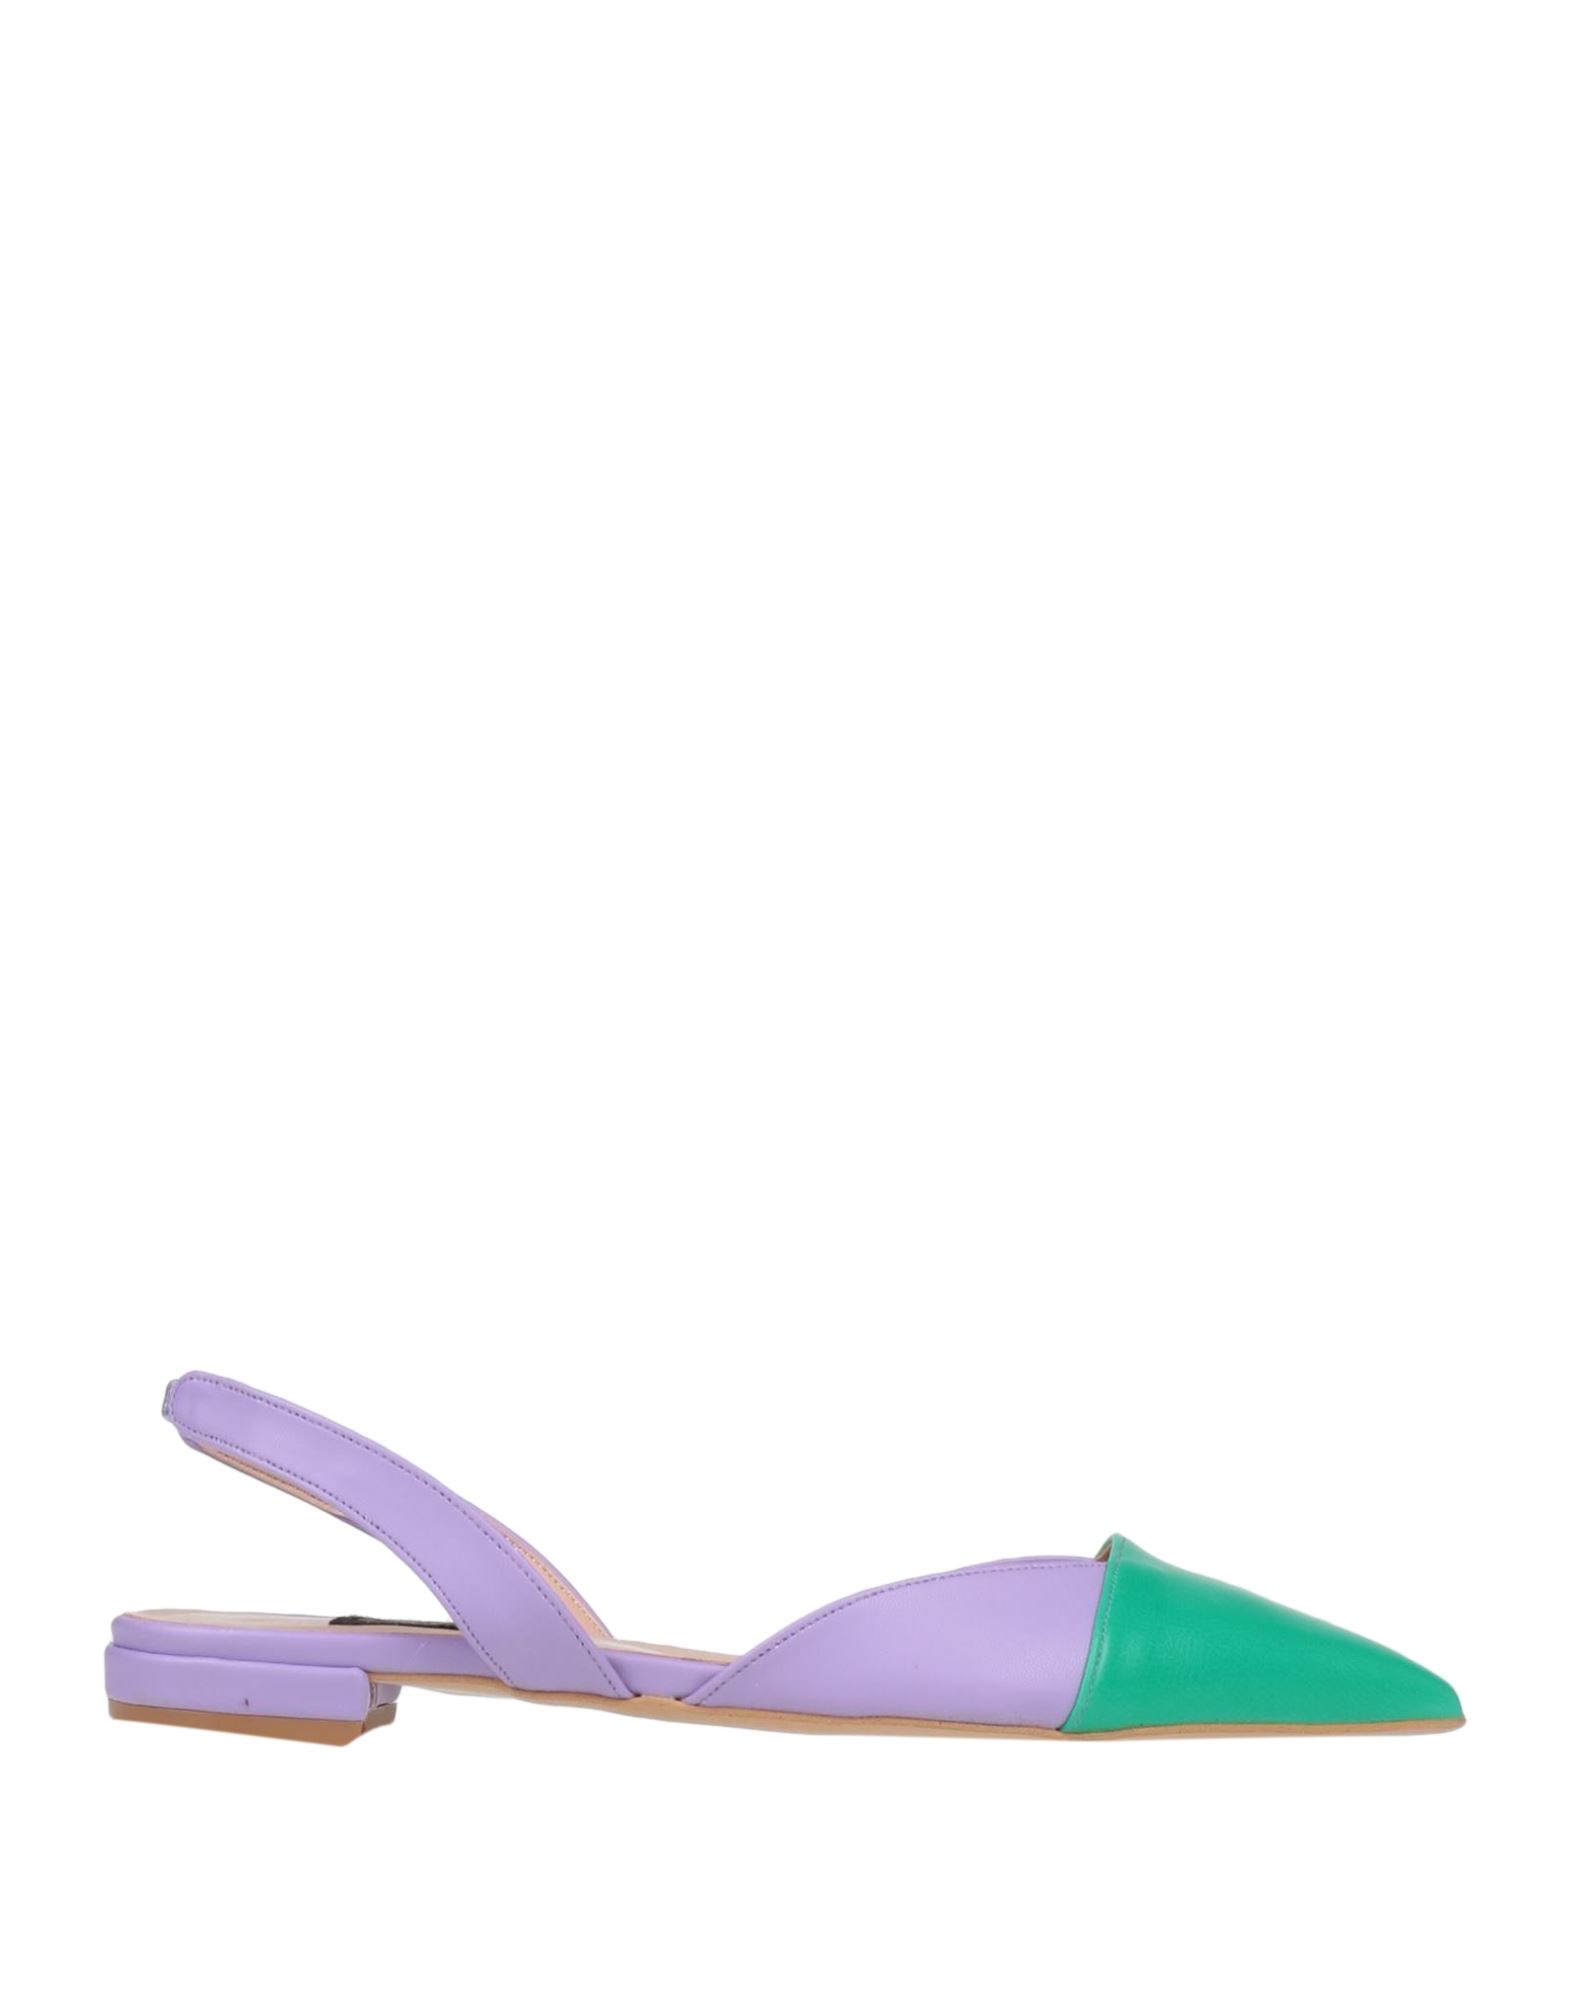 Islo Isabella Lorusso Ballet Flats In Green